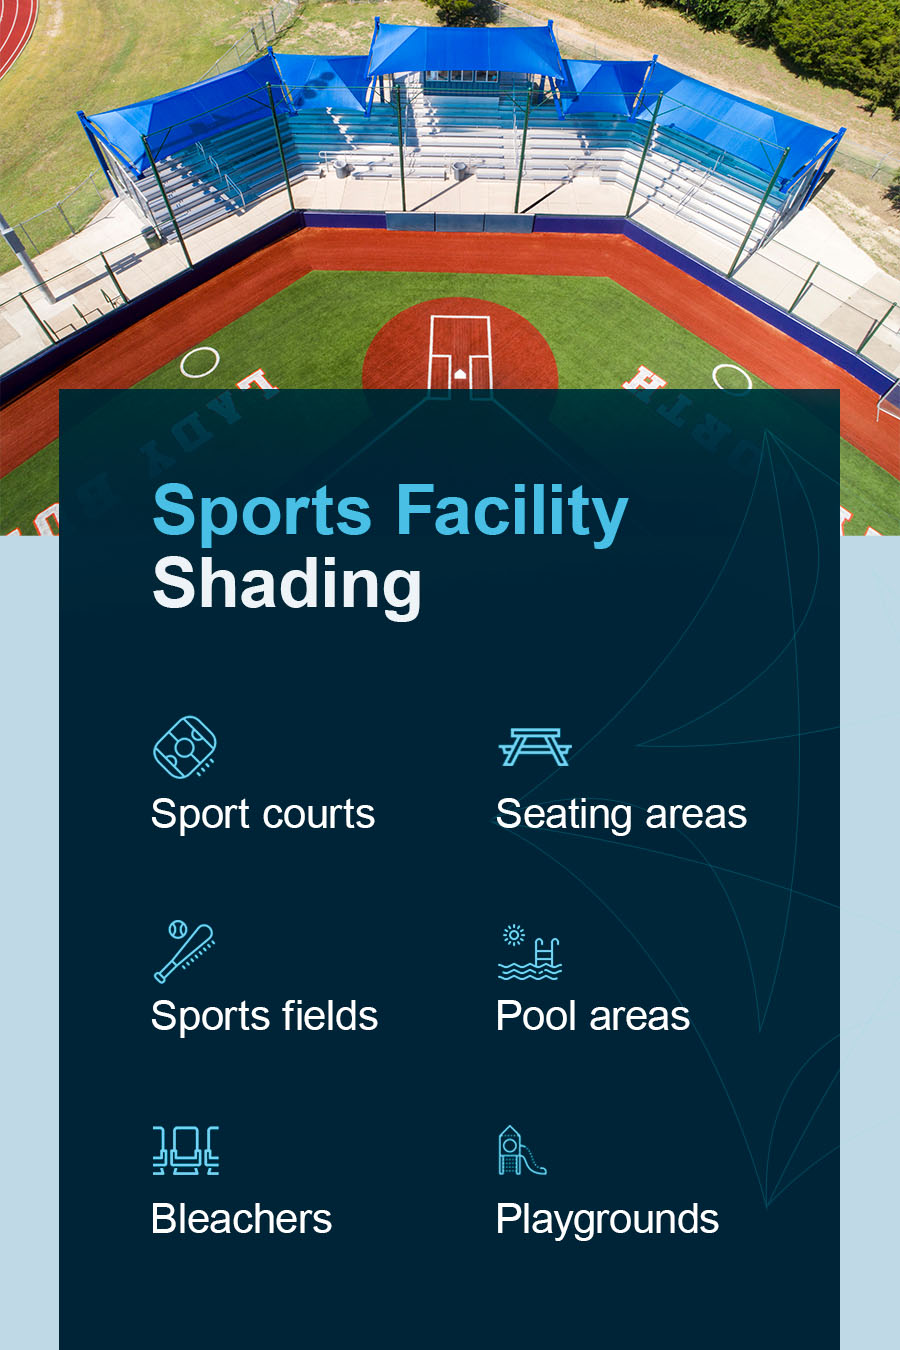 You can put shading over sports courts, seating areas, sports fields, and more.